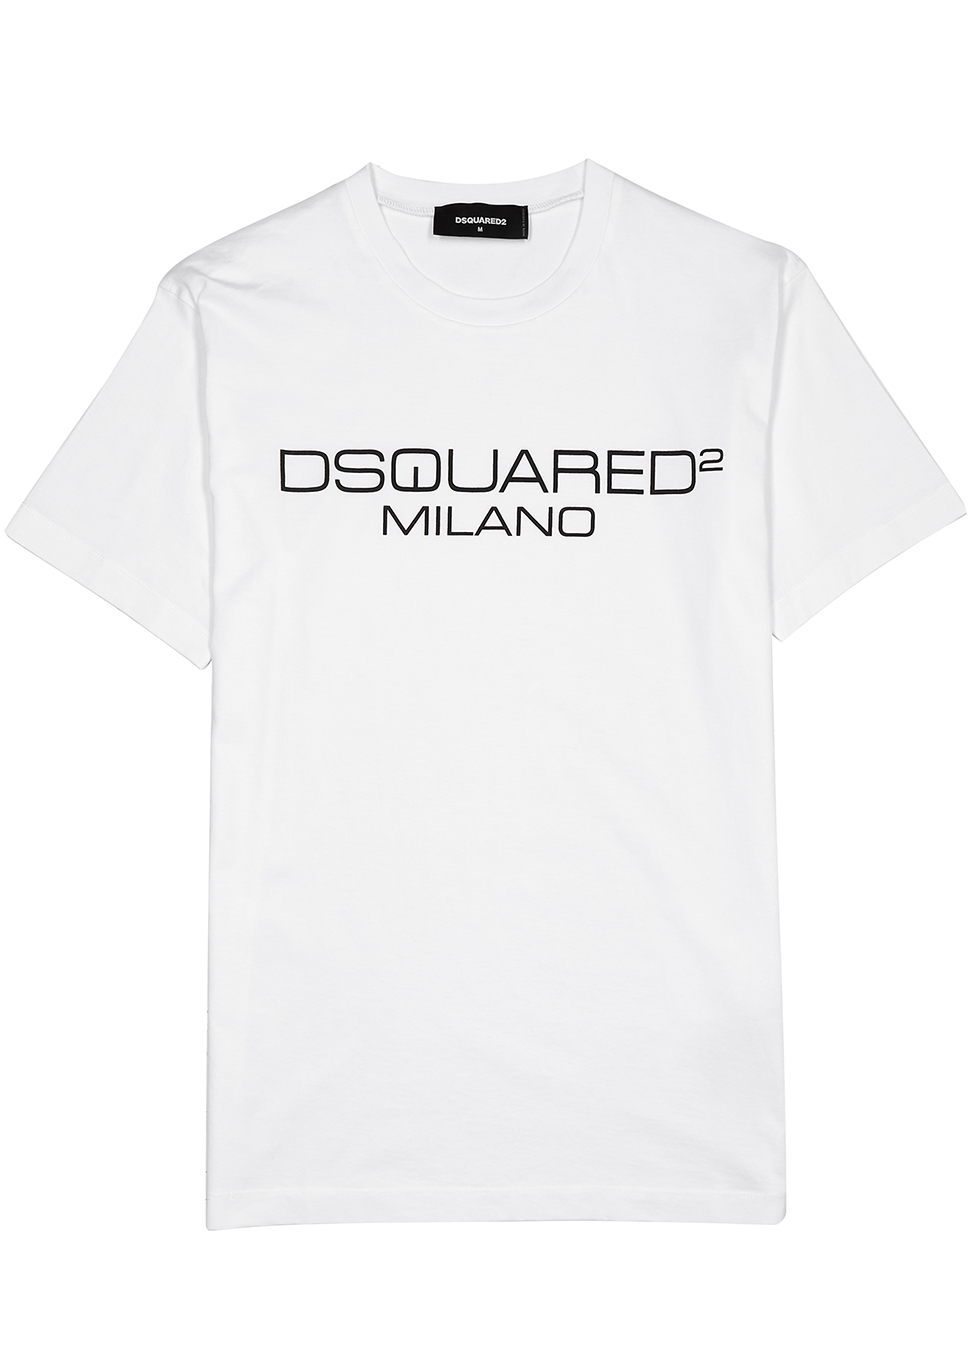 dsquared t shirt embossed